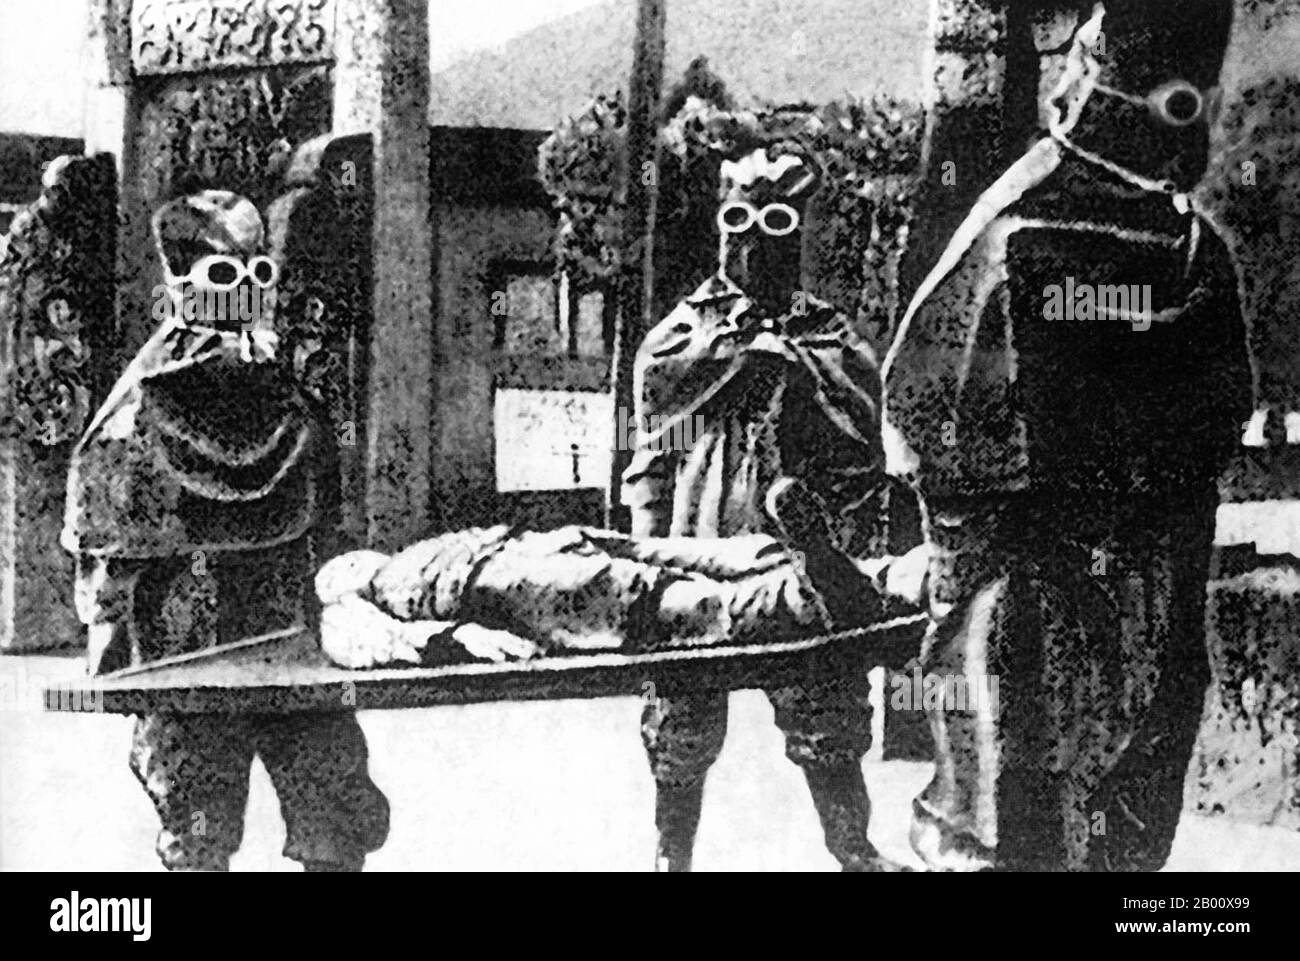 China: Japanese staff carrying a corpse at Unit 731 in Northeast China (1937-1945).  Unit 731 was a covert biological and chemical warfare research and development unit of the Imperial Japanese Army that undertook lethal human experimentation during the Second Sino-Japanese War (1937–1945) and World War II. It was responsible for some of the most notorious war crimes carried out by Japanese personnel. Unit 731 was the code name of an Imperial Japanese Army unit officially known as the Epidemic Prevention and Water Purification Department of the Kwantung Army. Stock Photo